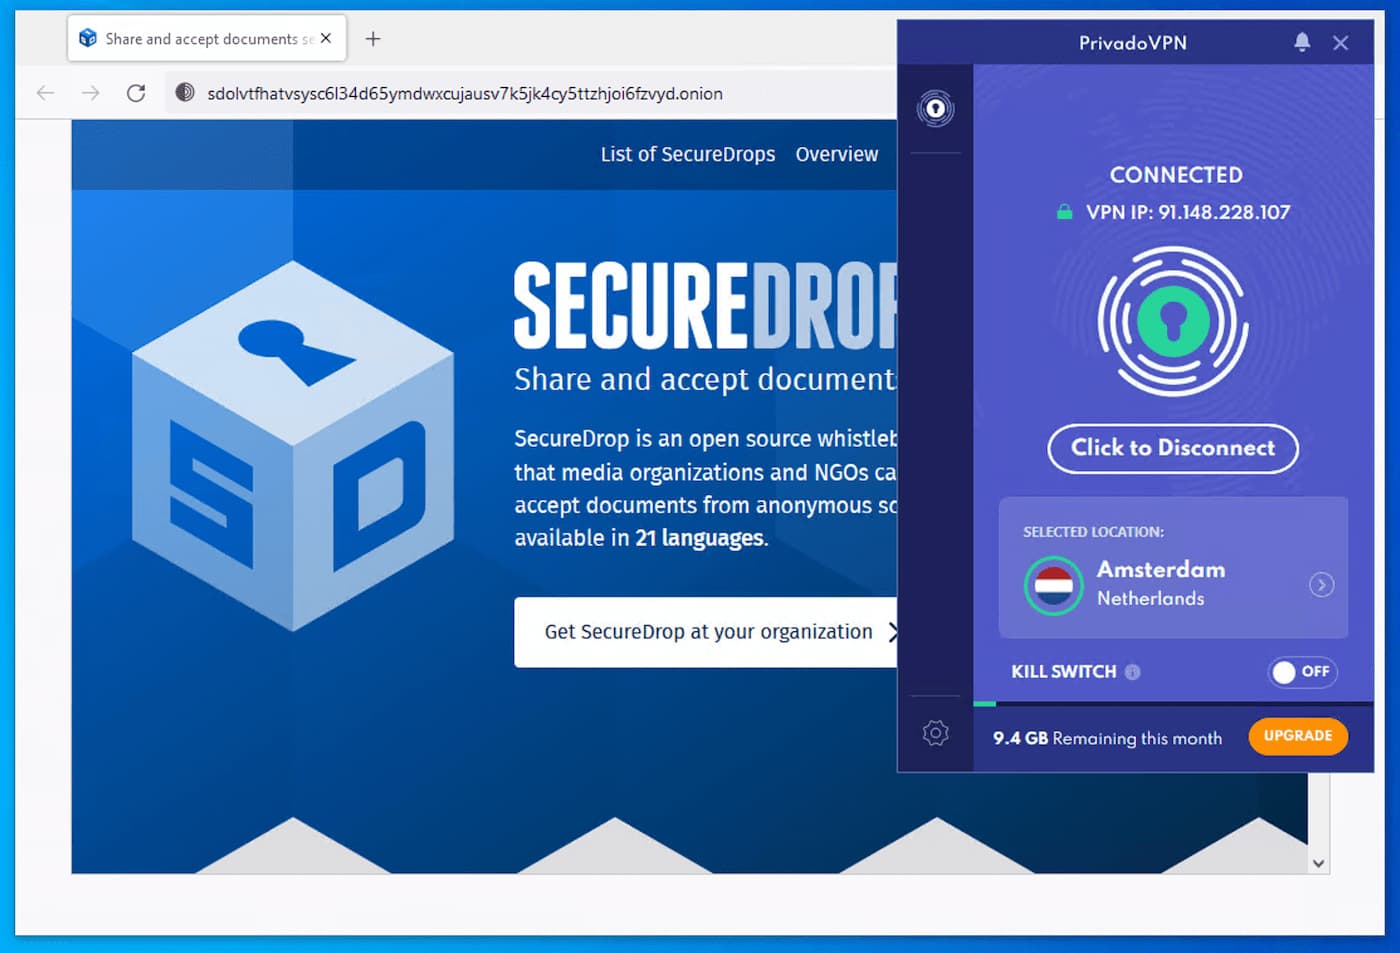 We tested PrivadoVPN free with SecureDrop’s onion site. 